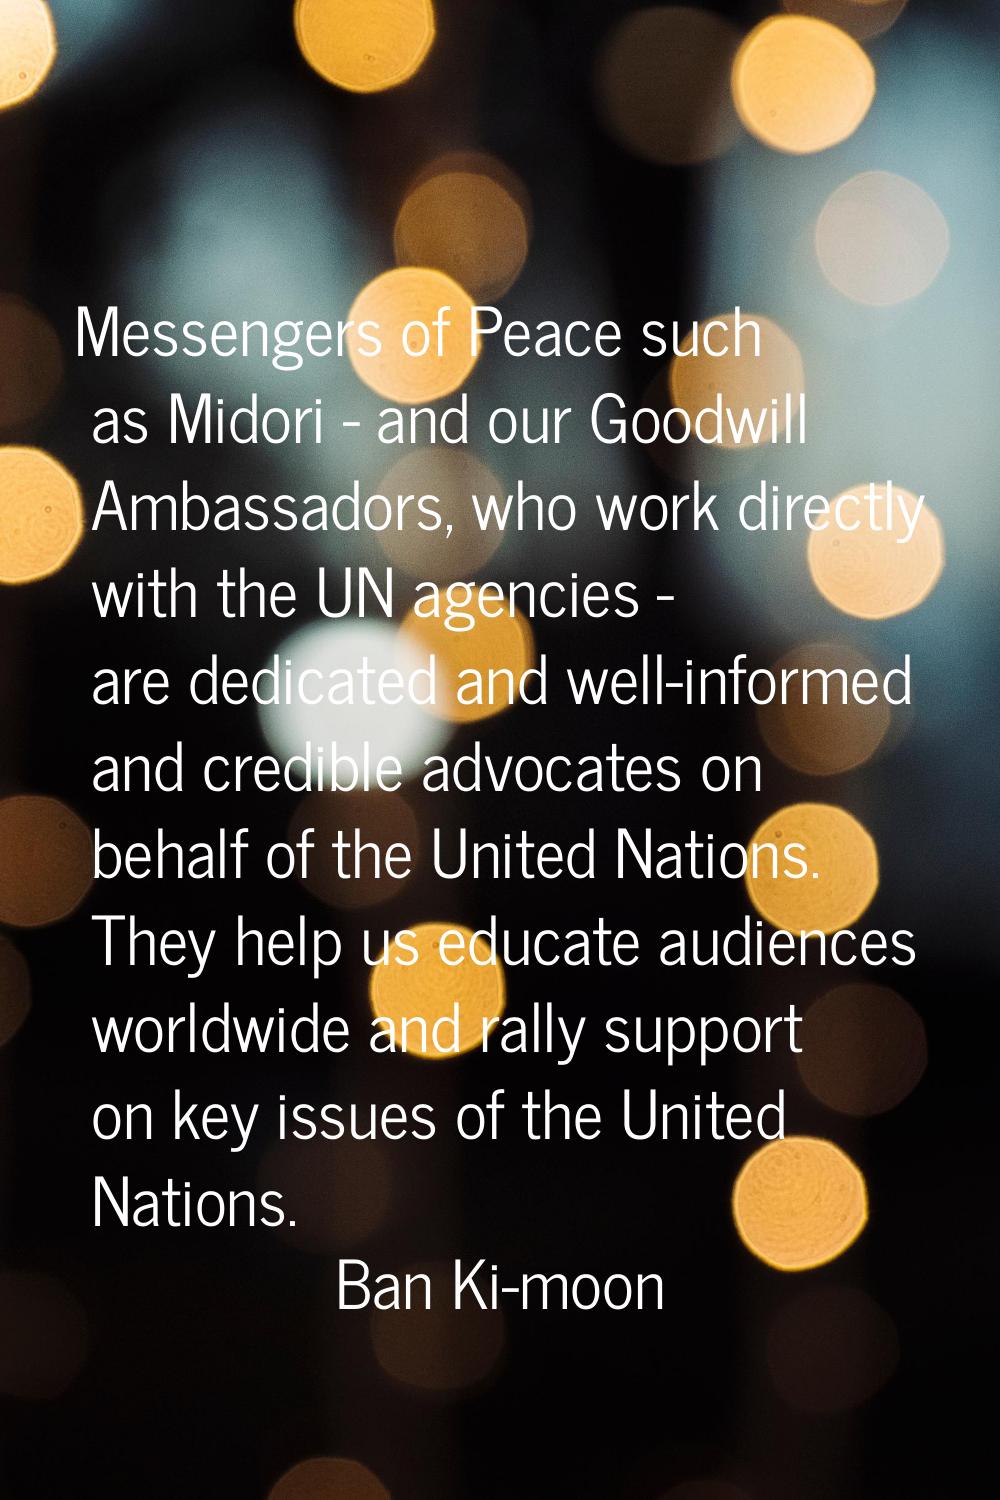 Messengers of Peace such as Midori - and our Goodwill Ambassadors, who work directly with the UN ag